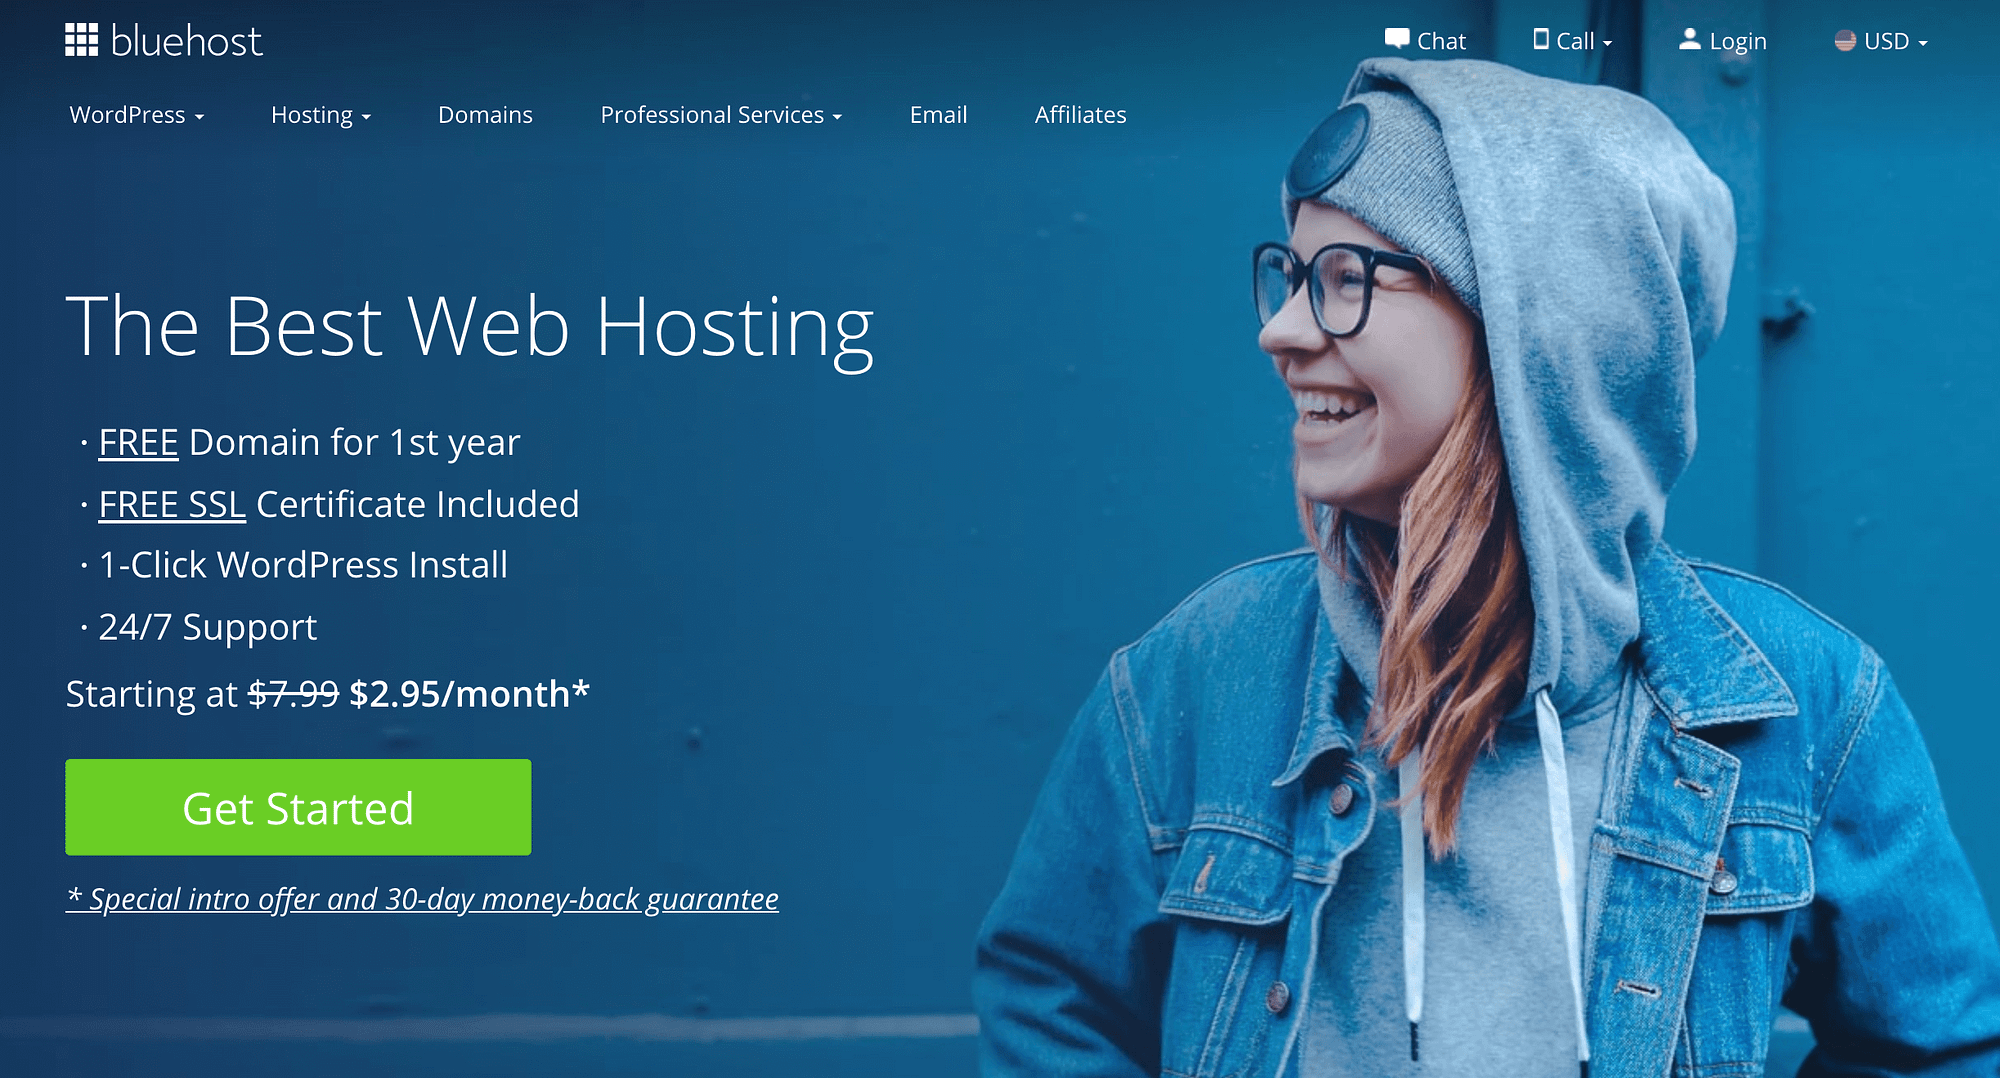 Bluehost helps you create an email with personalized domain